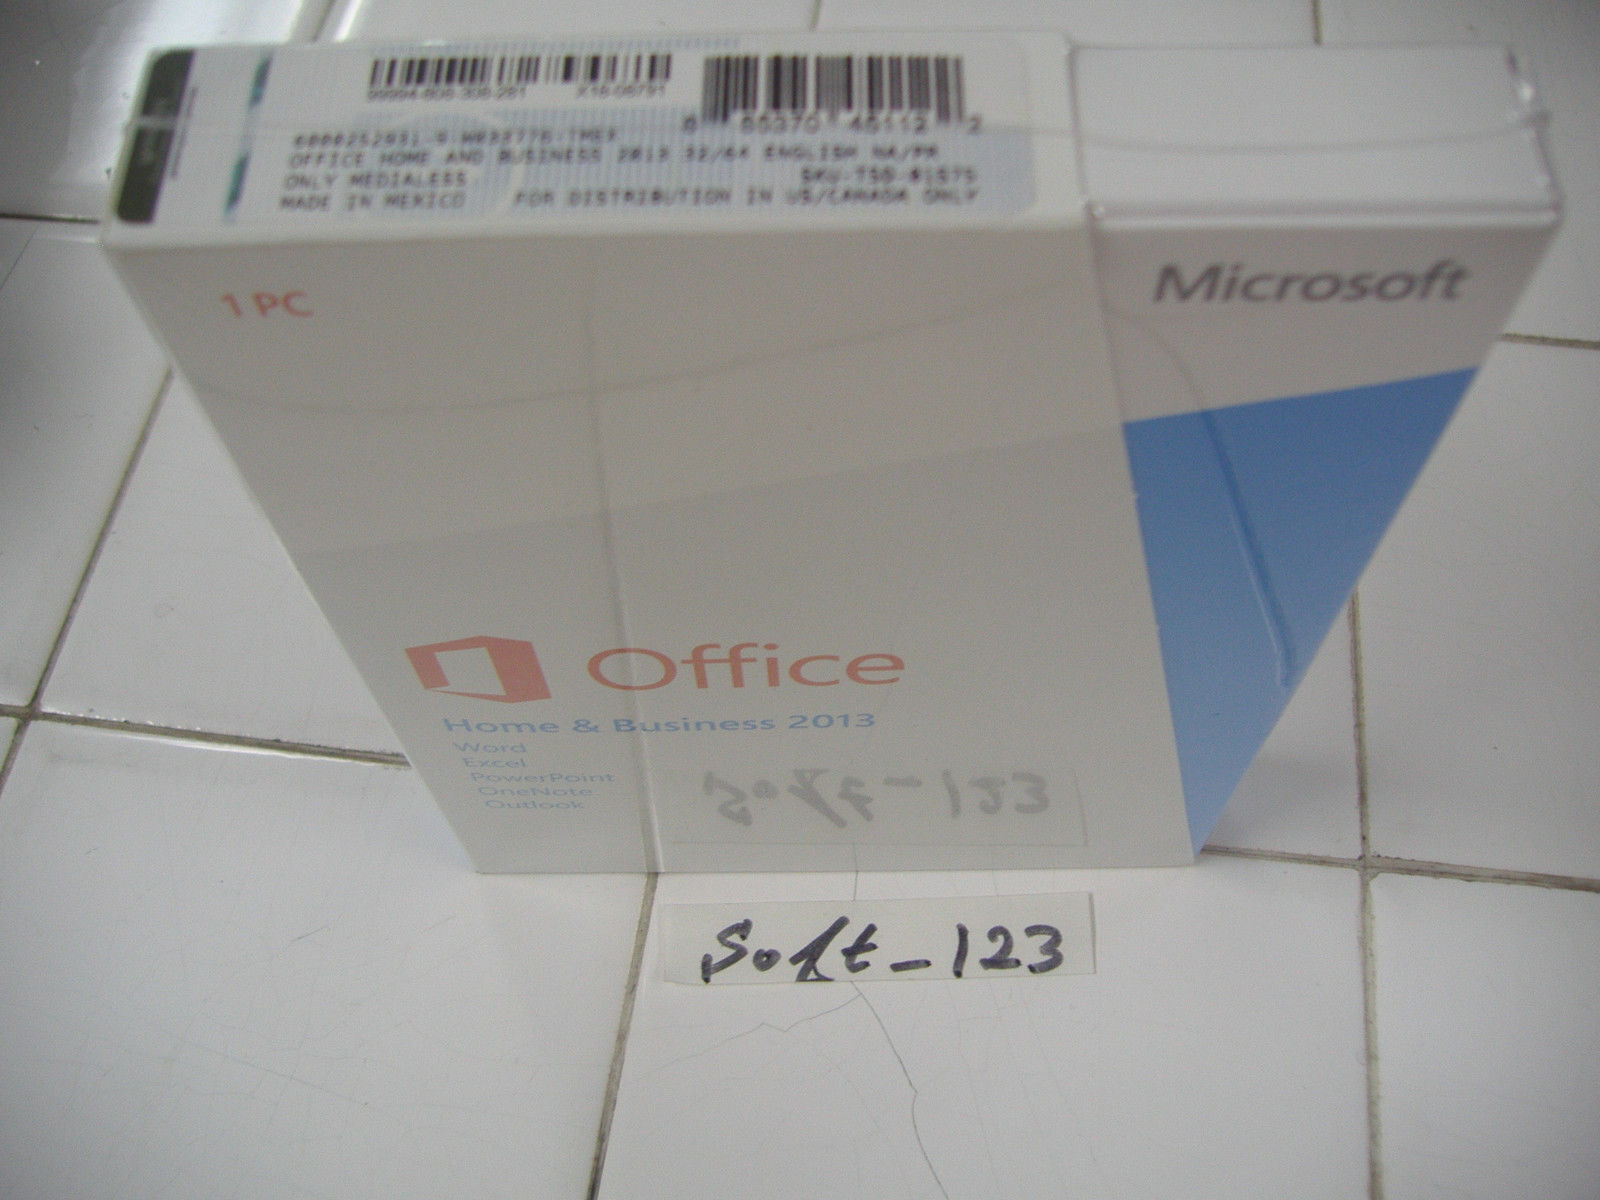 Microsoft Office 2013 Home and Business Product Key Card Full Retail Version